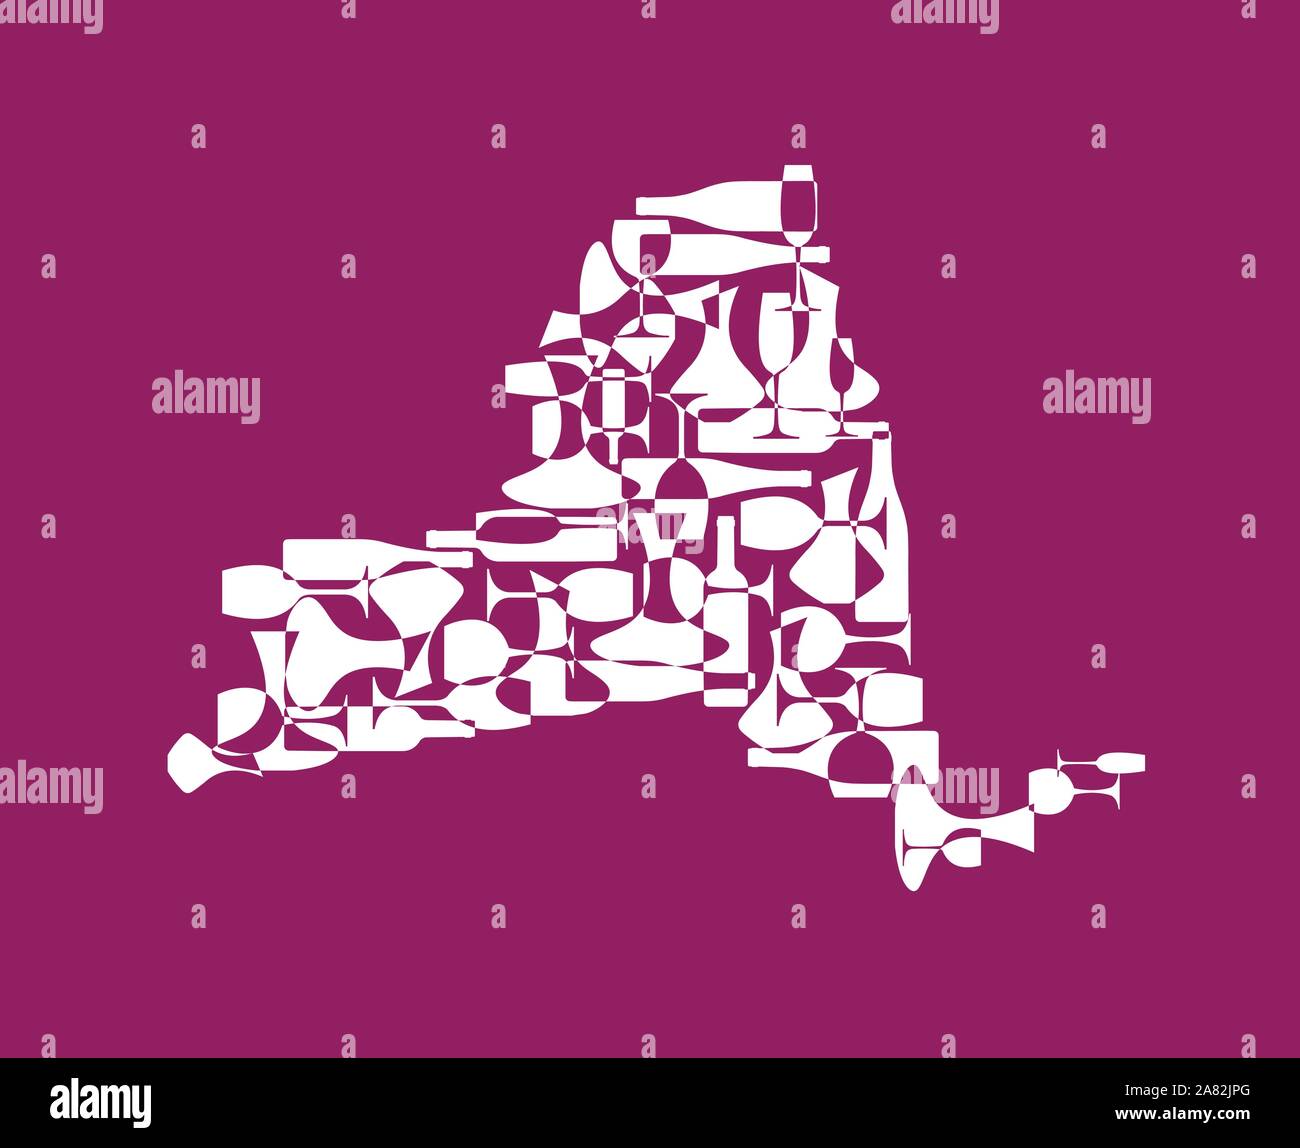 States winemakers - stylized maps from silhouettes of wine bottles, glasses and decanters. Map of New York. Stock Vector